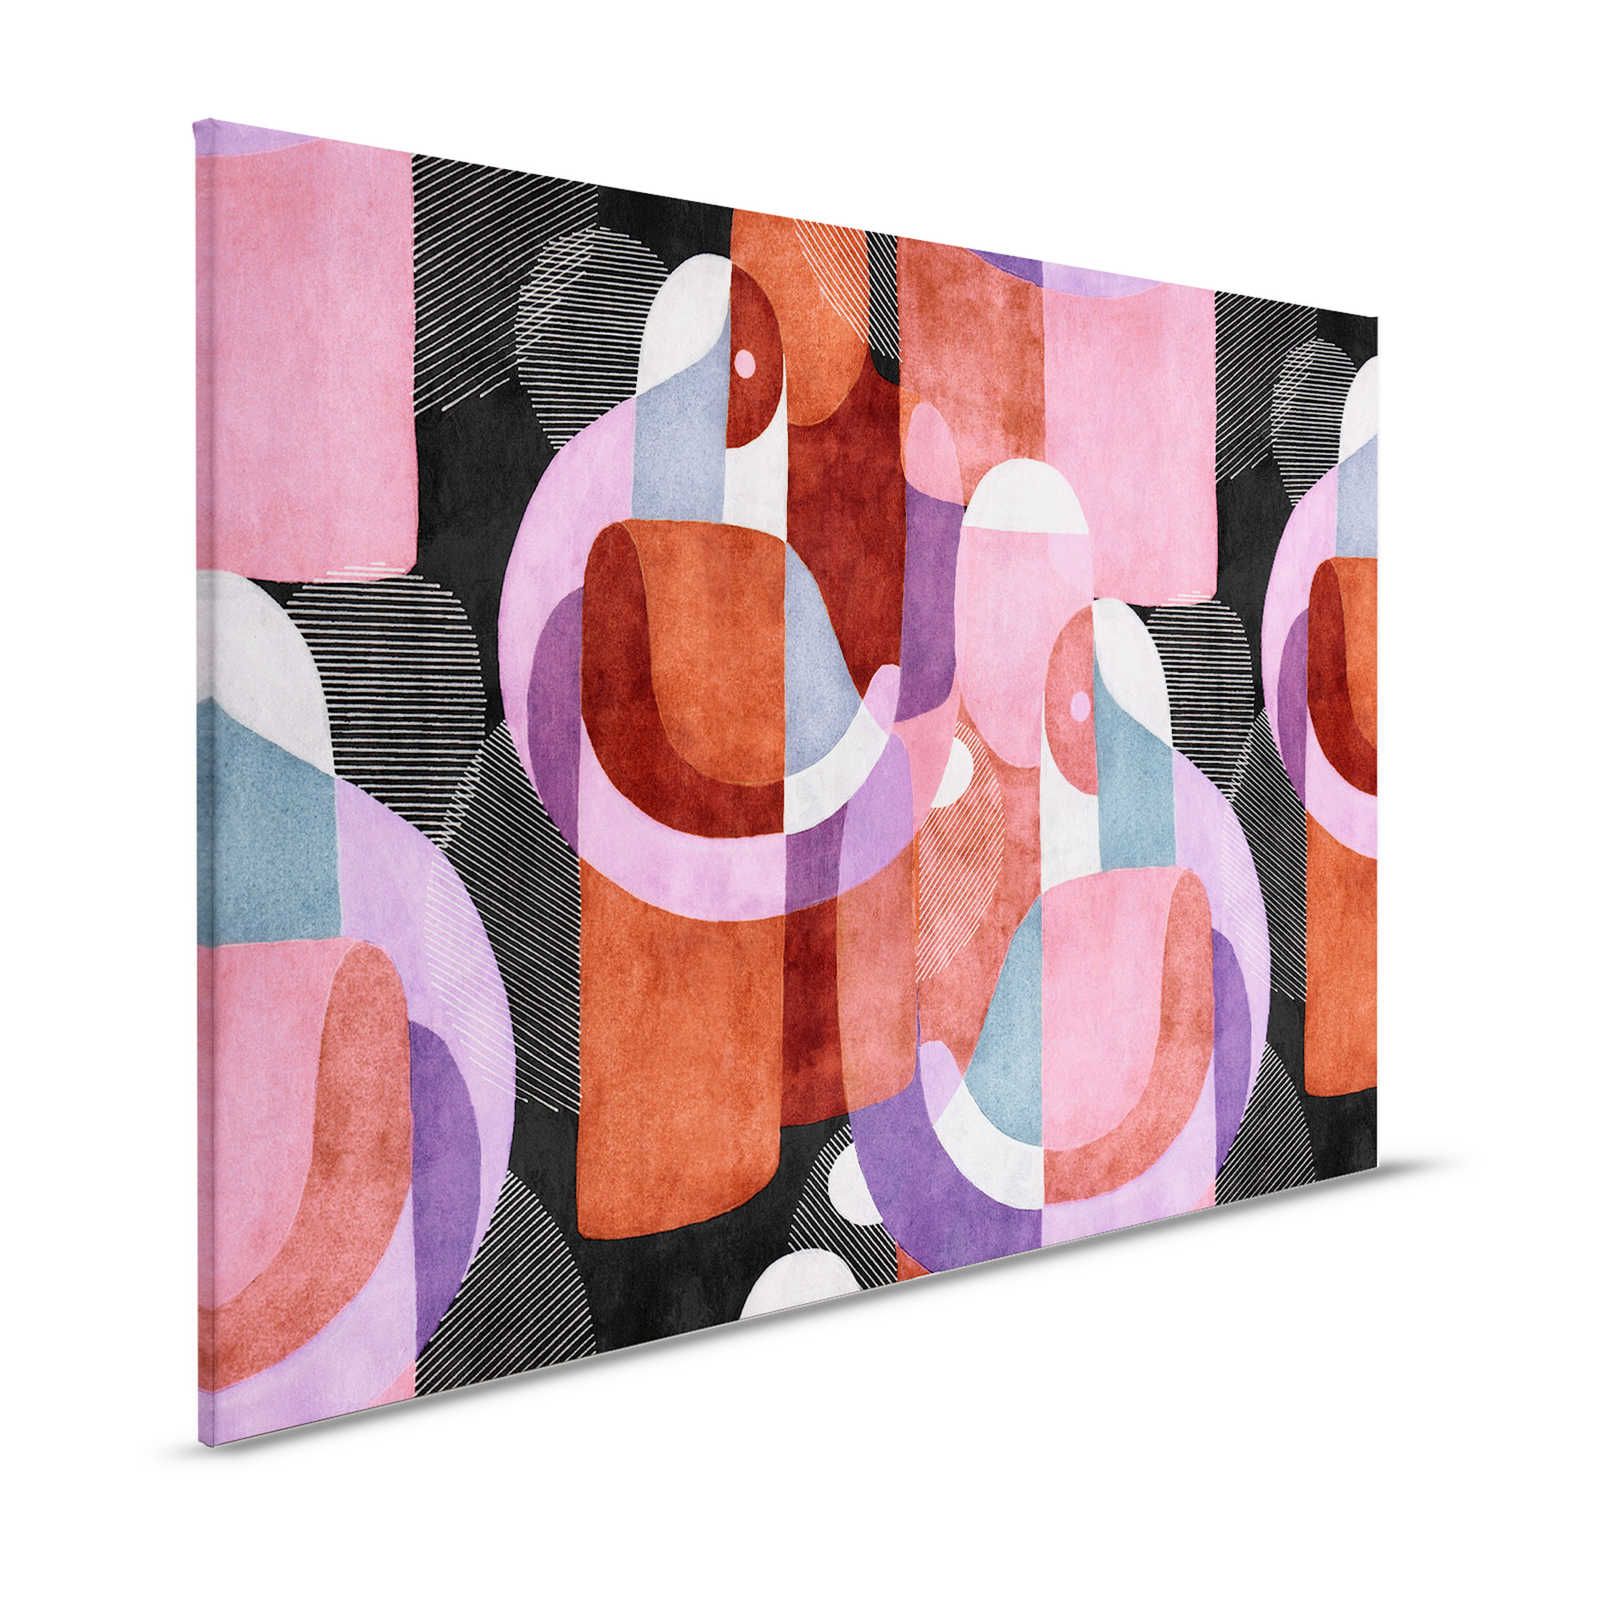 Meeting Place 2 - Canvas painting abstract ethno design in black & pink - 1,20 m x 0,80 m
